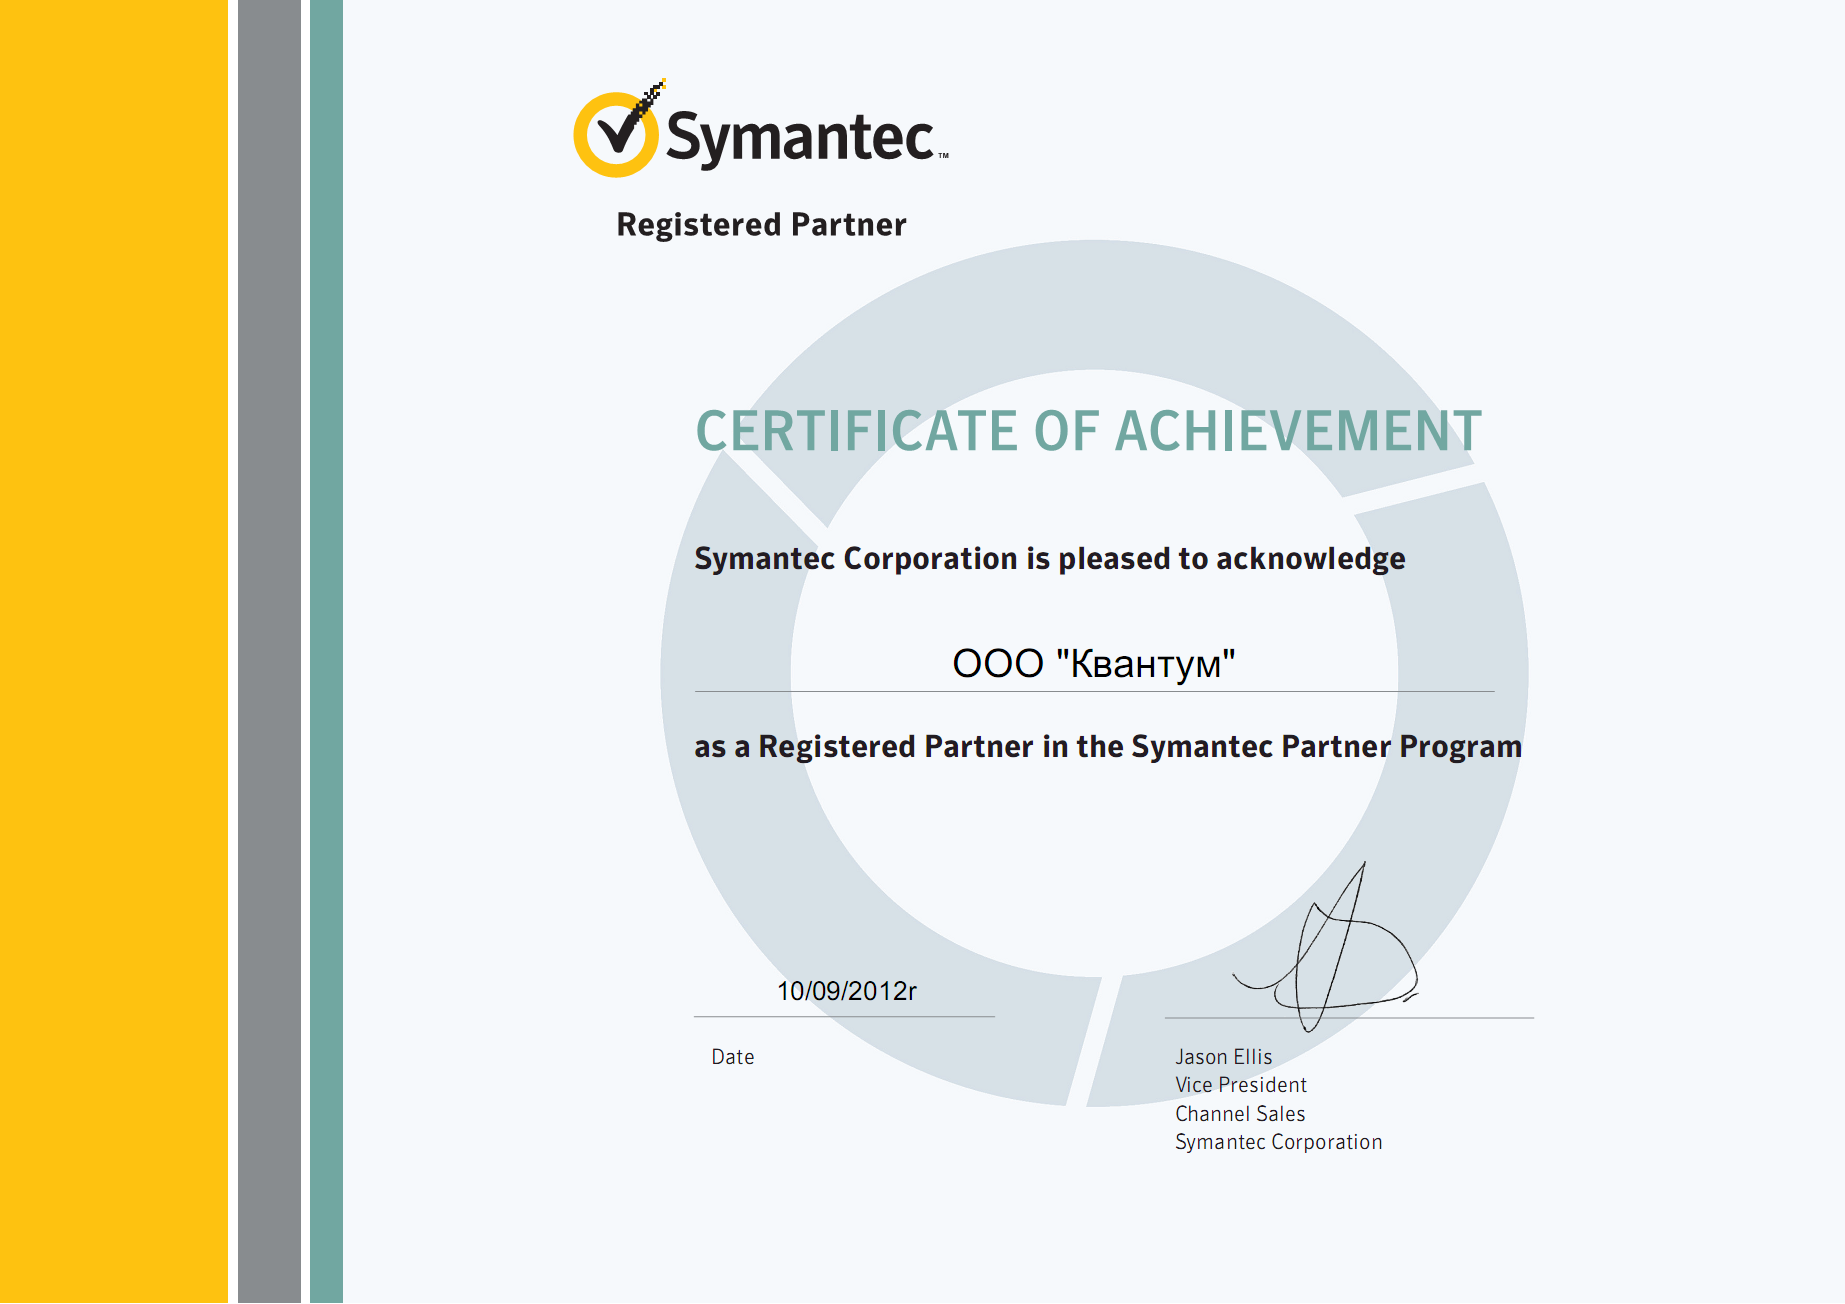 Symantec Corporation is pleased to acknowledge ООО Квантум